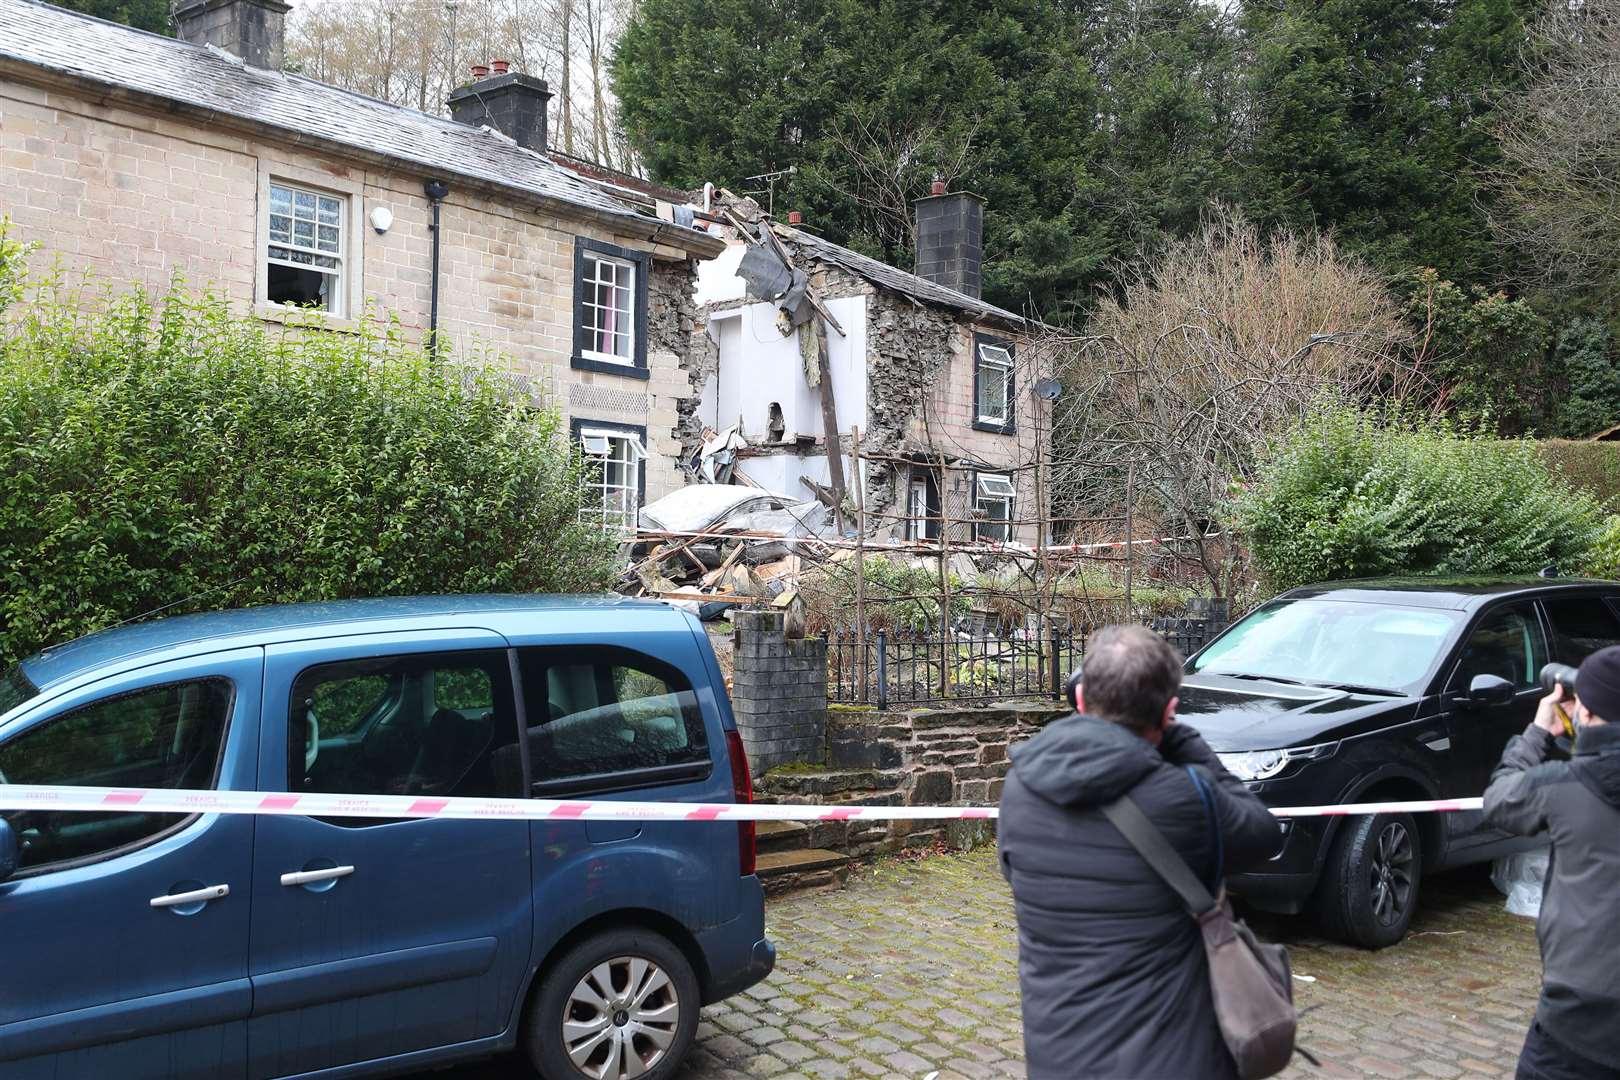 The scene in Ramsbottom, Bury, Greater Manchester, where the body of a woman has been found after a house collapsed (Peter Byrne/PA)